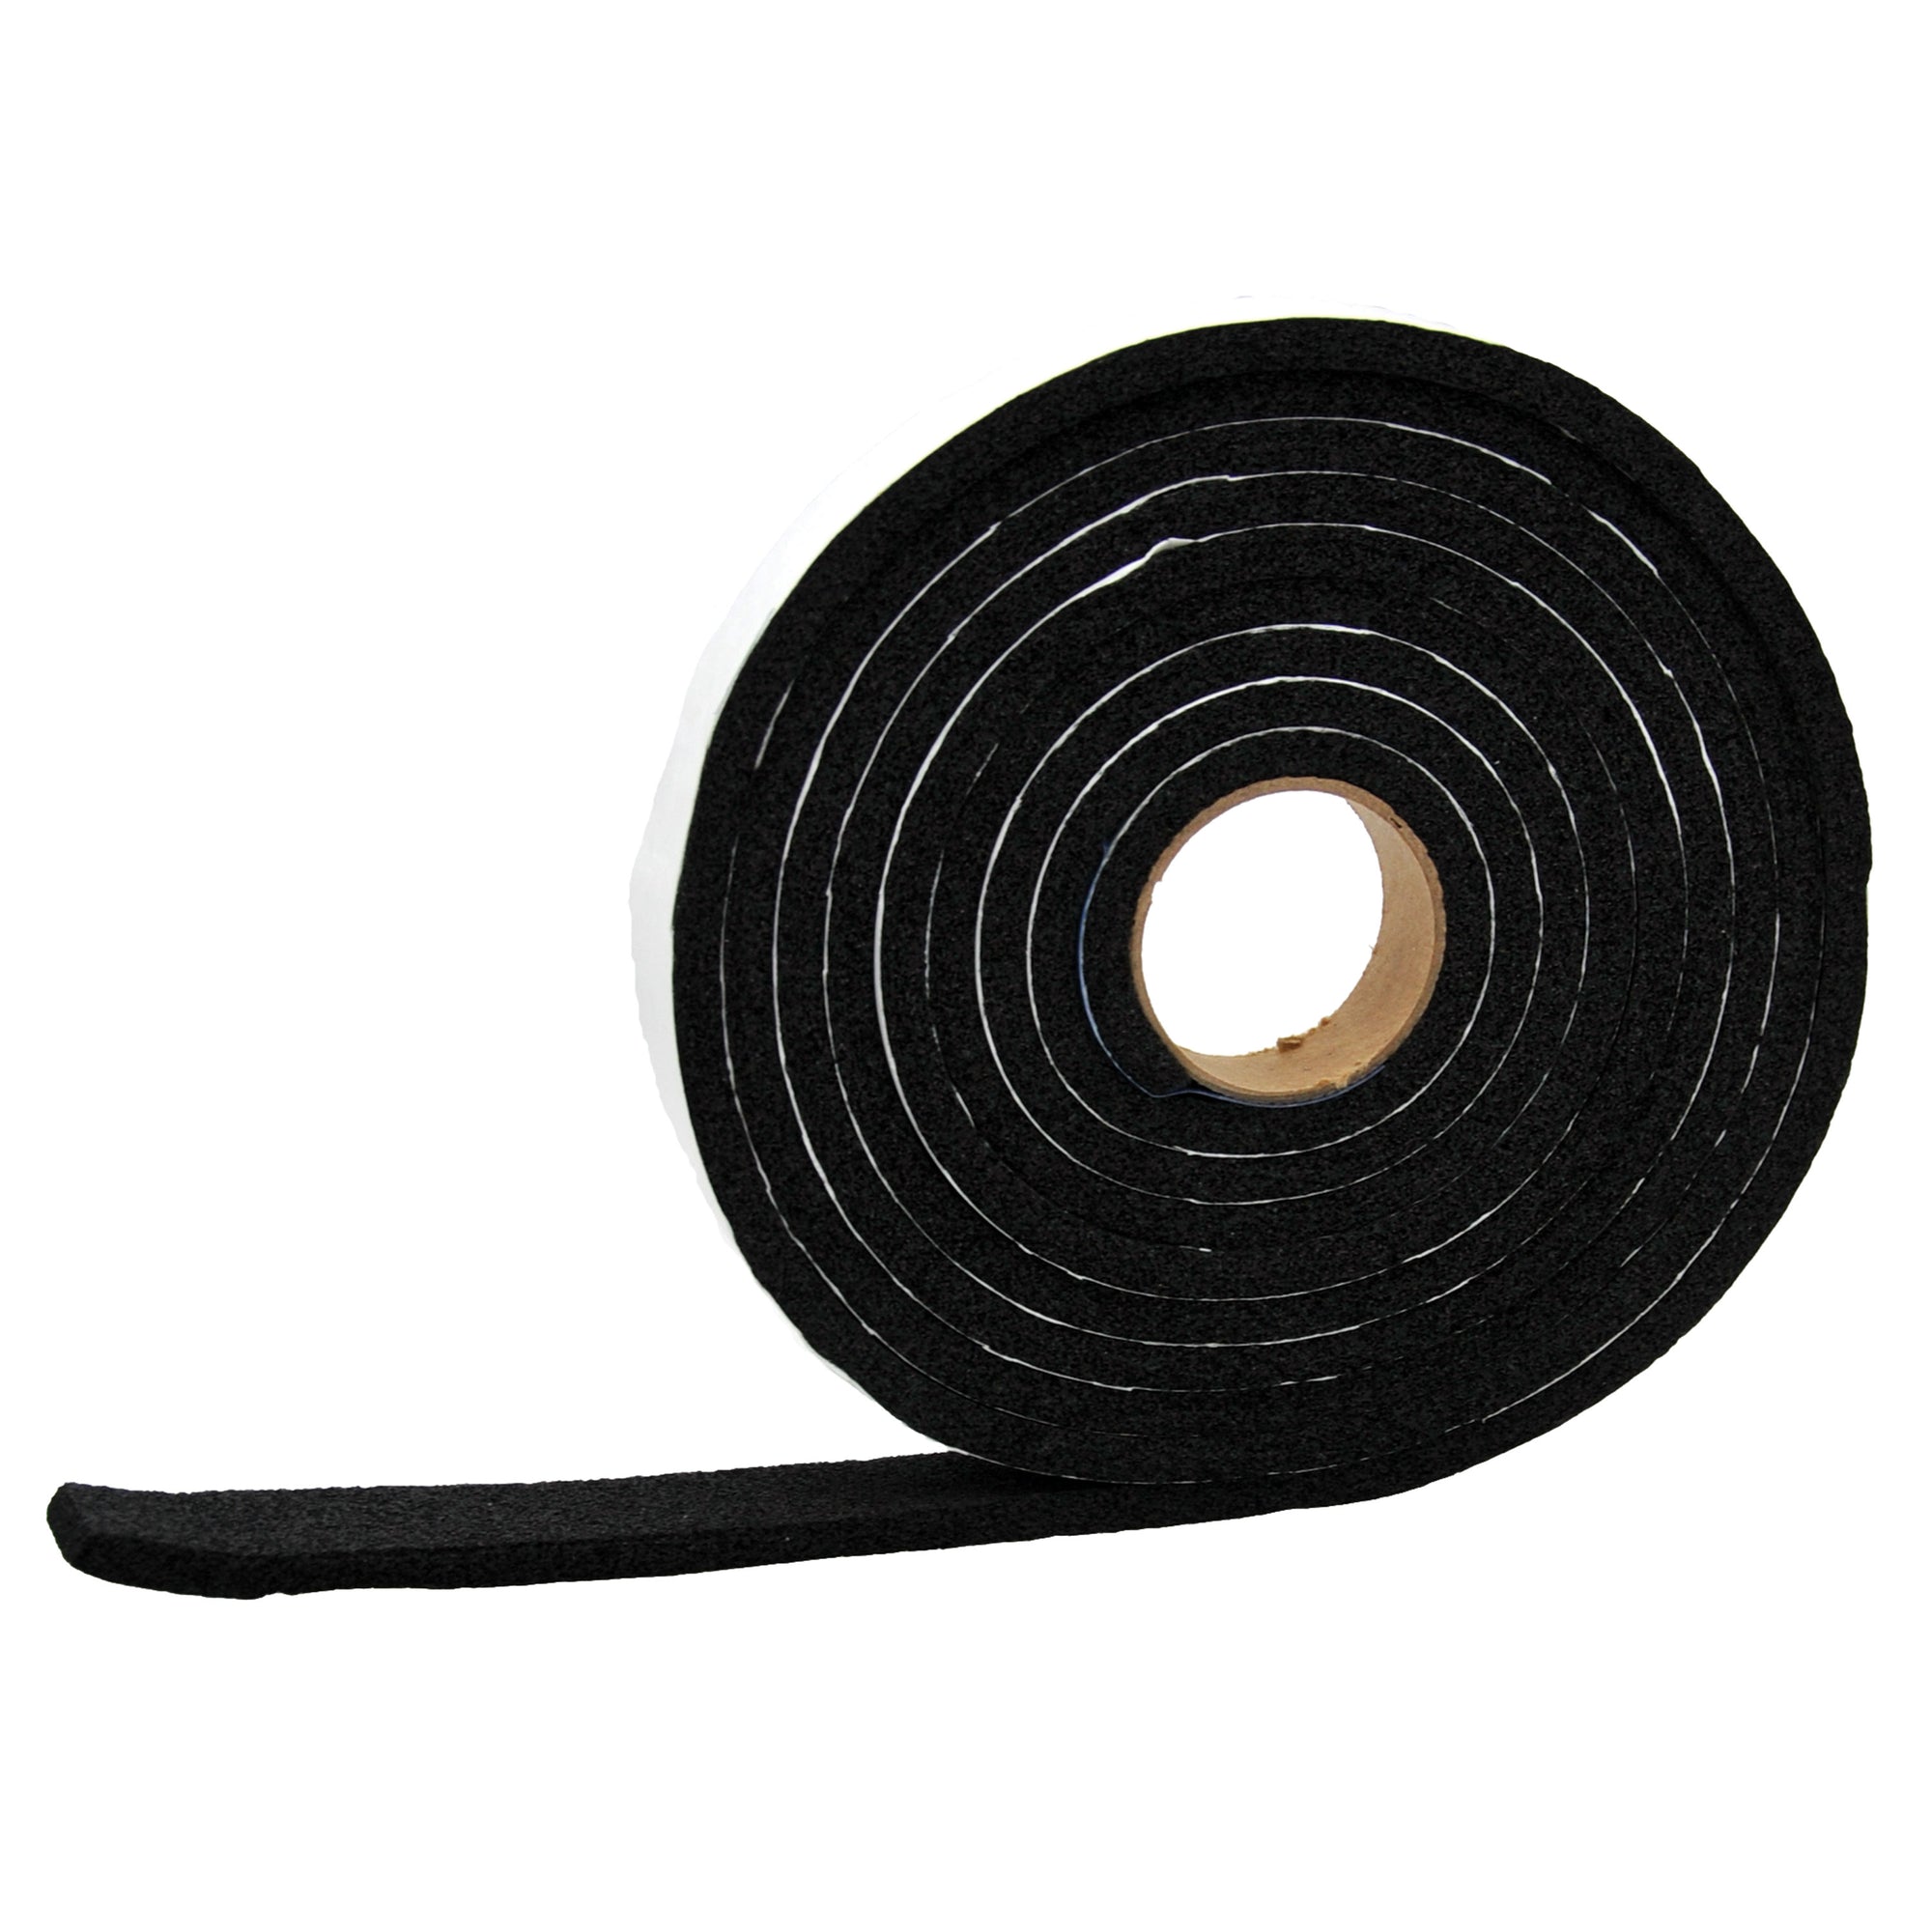 AP Products 018-3163817 Weather Stripping - 3/16" x 3/8" x 50'